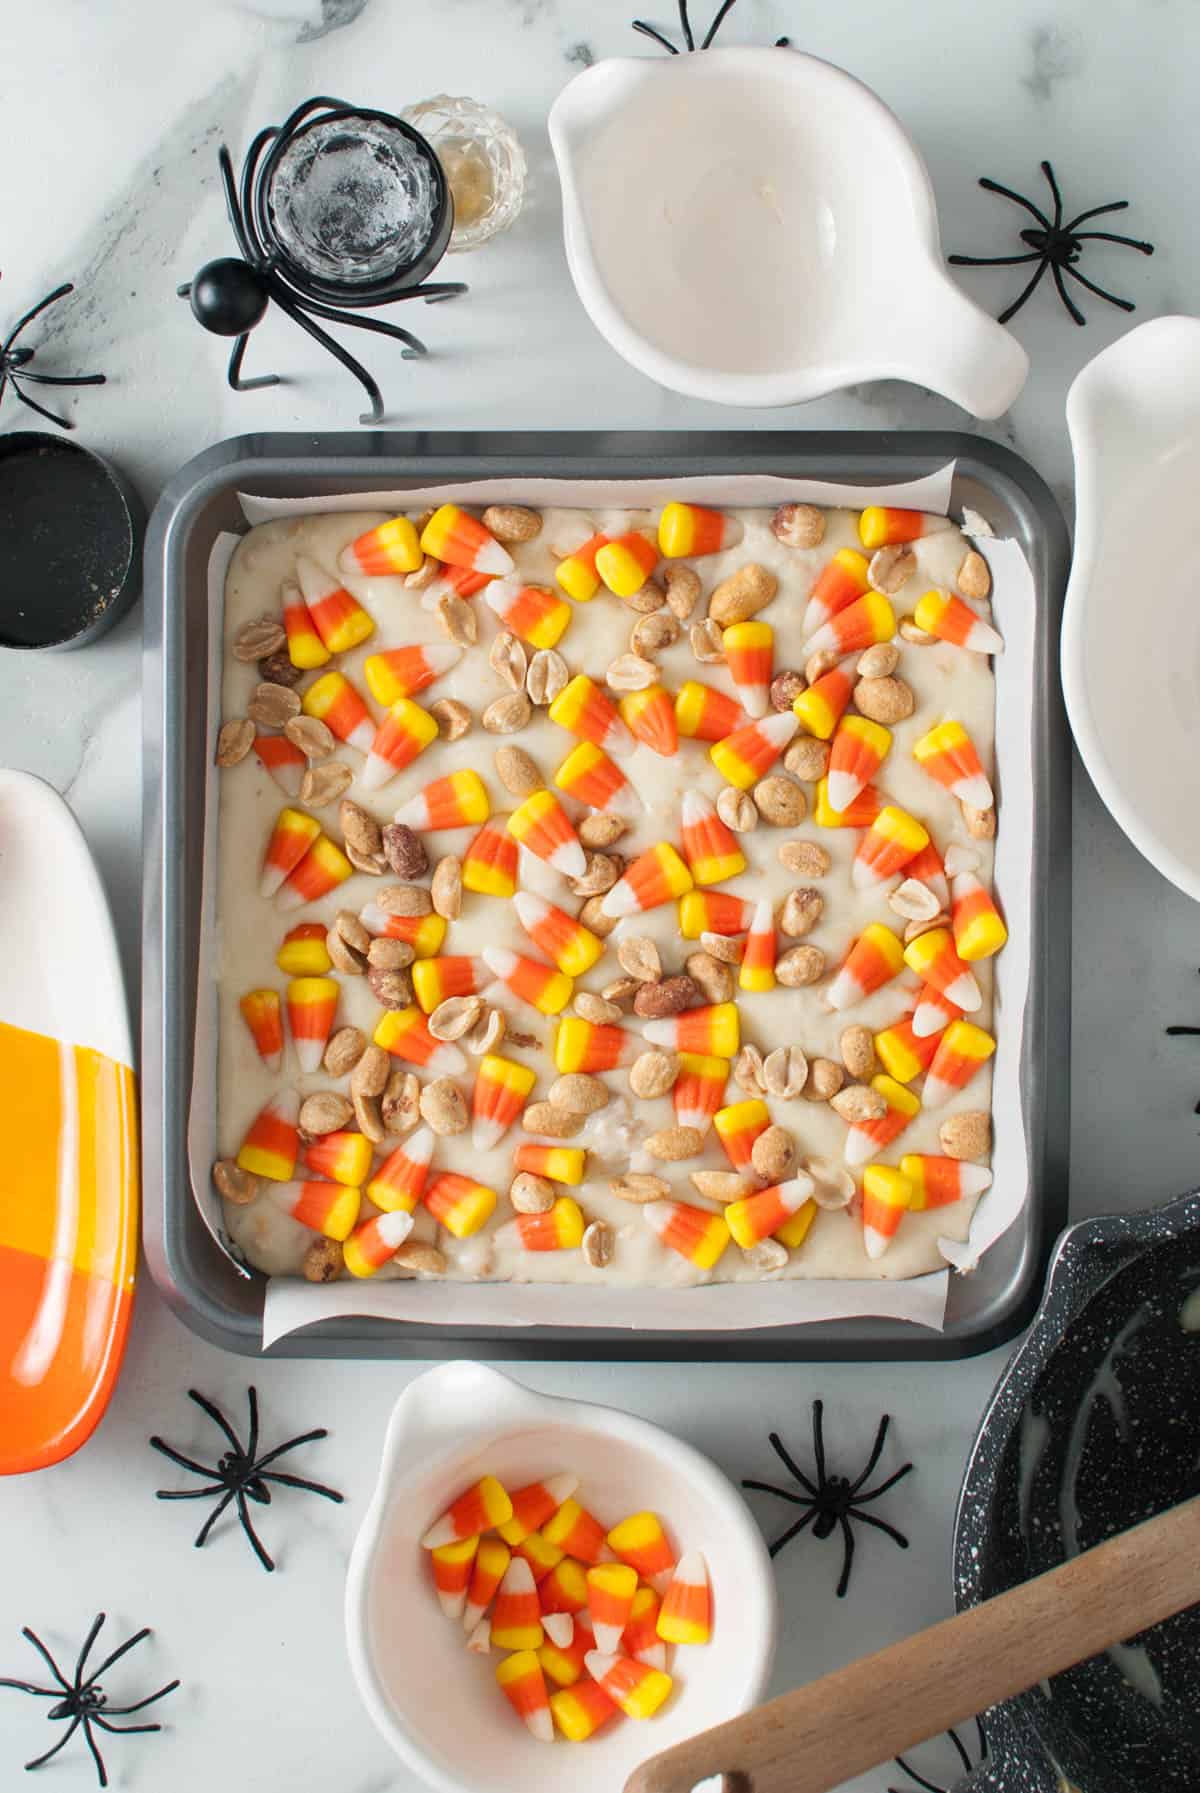 A batch of creamy white chocolate fudge with candy corn and dry roasted peanuts sprinkled on top.